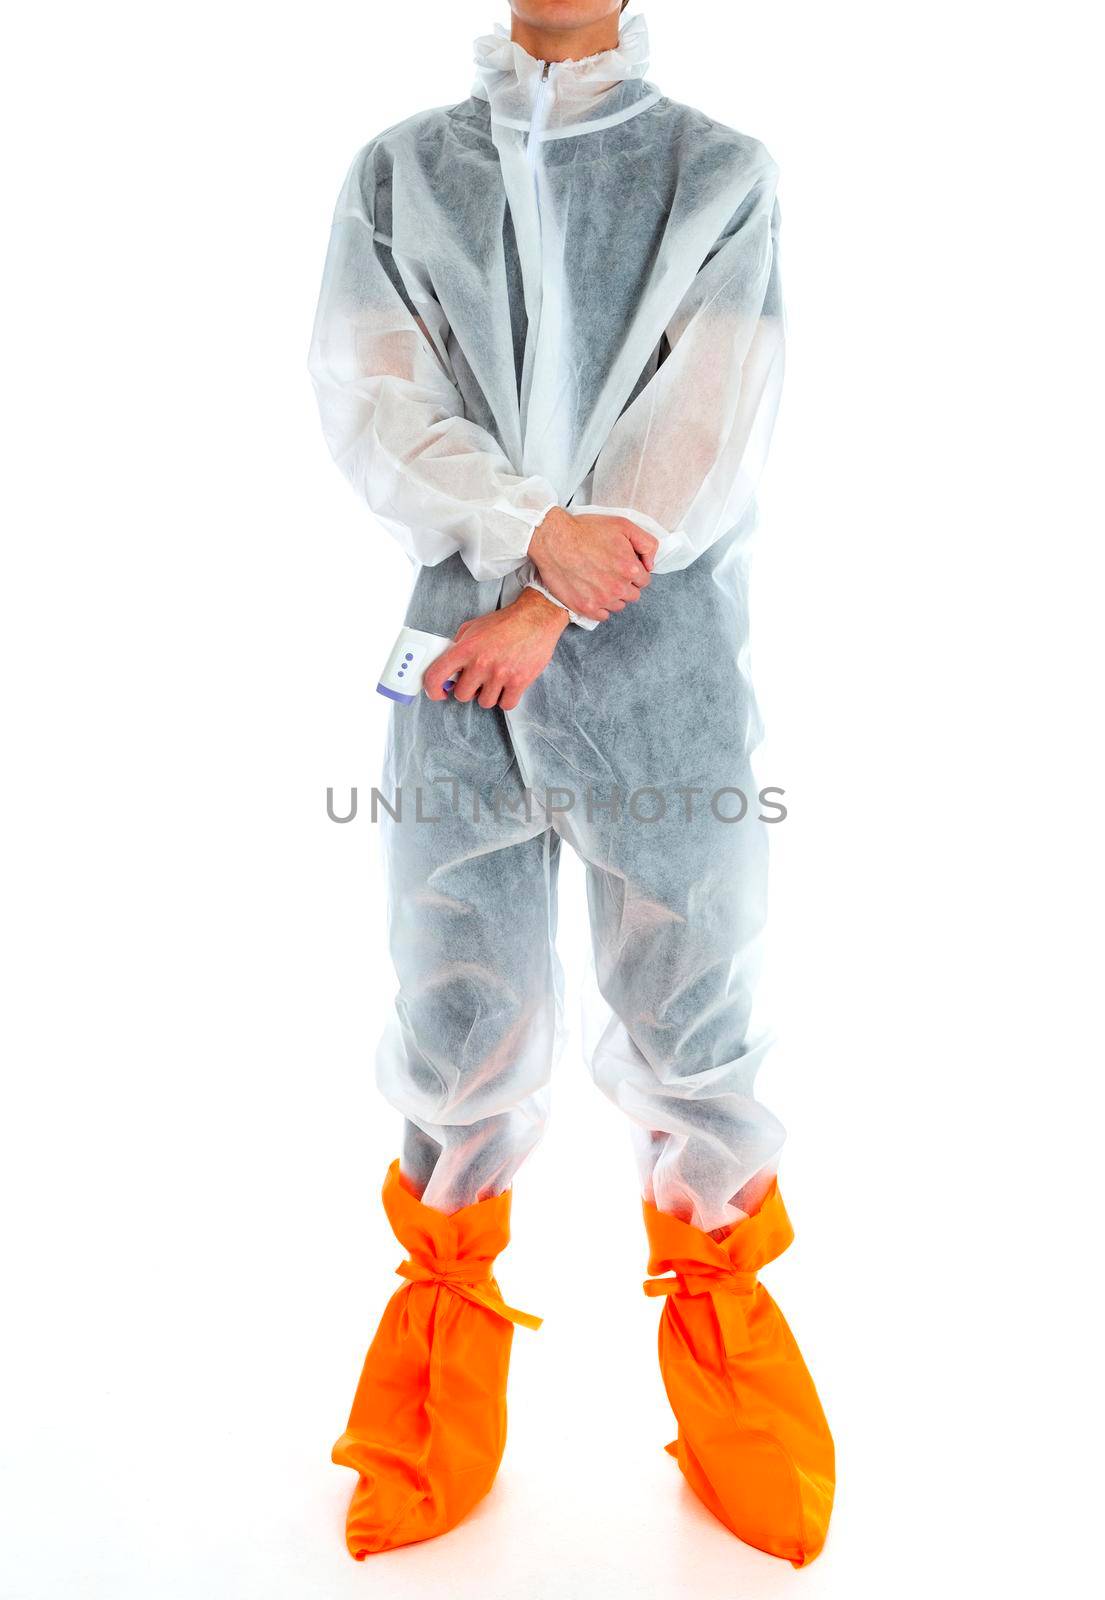 Man wearing protective suit and orange shoes isolated on white background by Nobilior